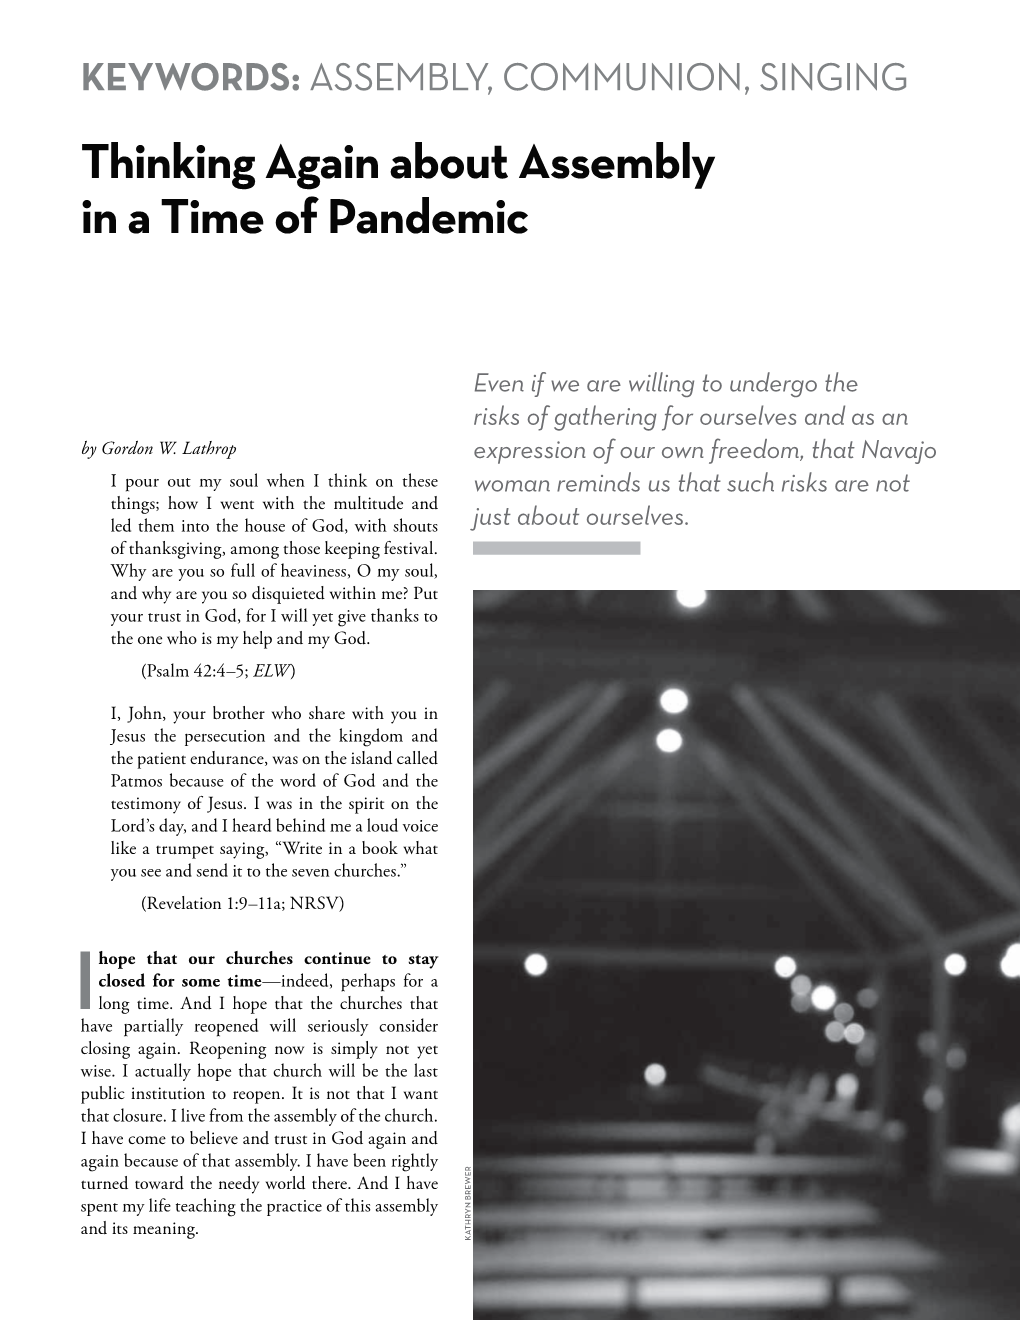 Thinking Again About Assembly in a Time of Pandemic – Gordon W